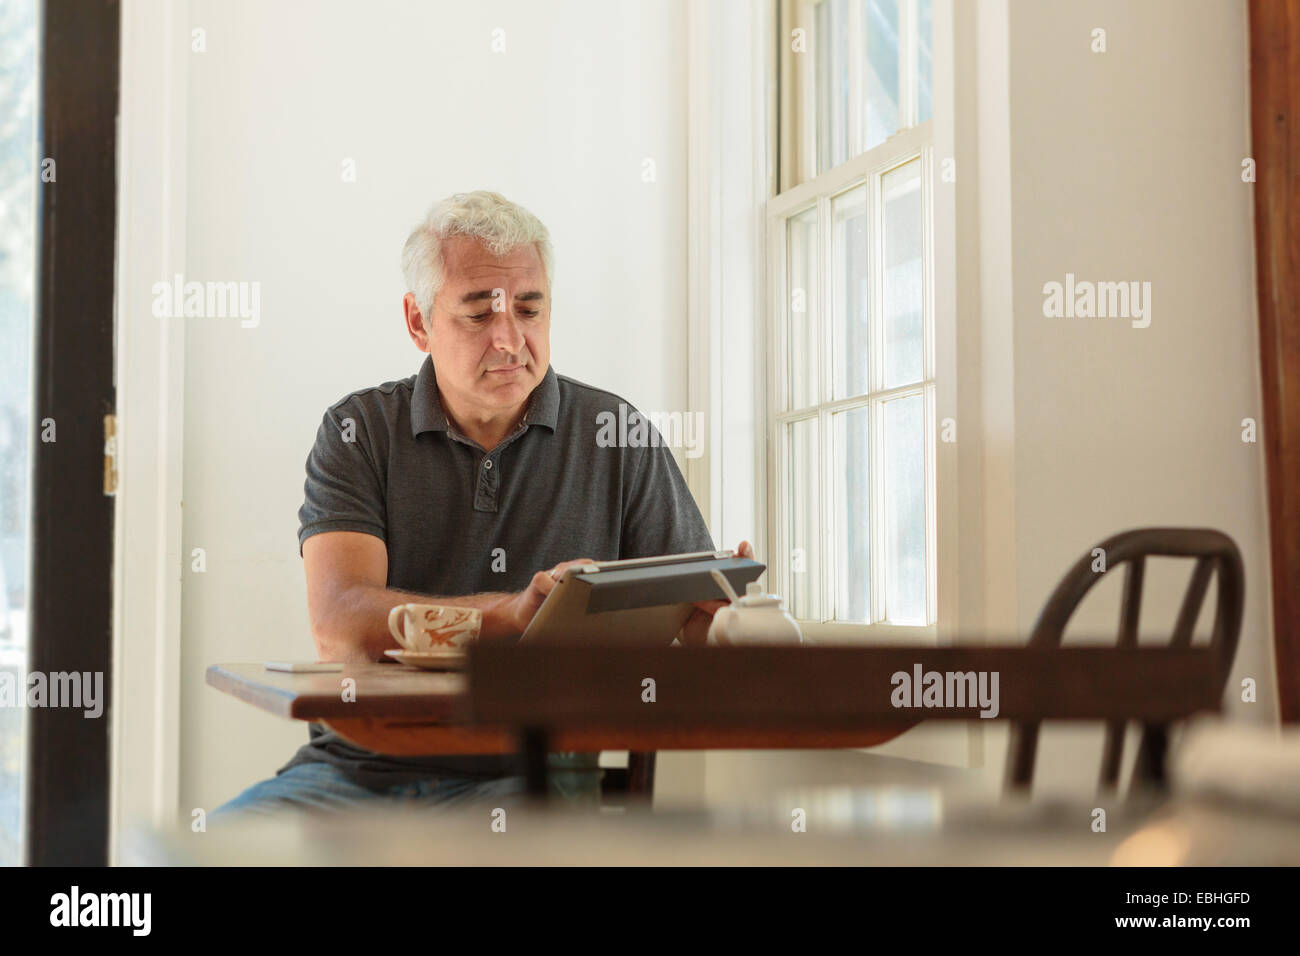 Mature man using digital tablet in country store cafe Banque D'Images